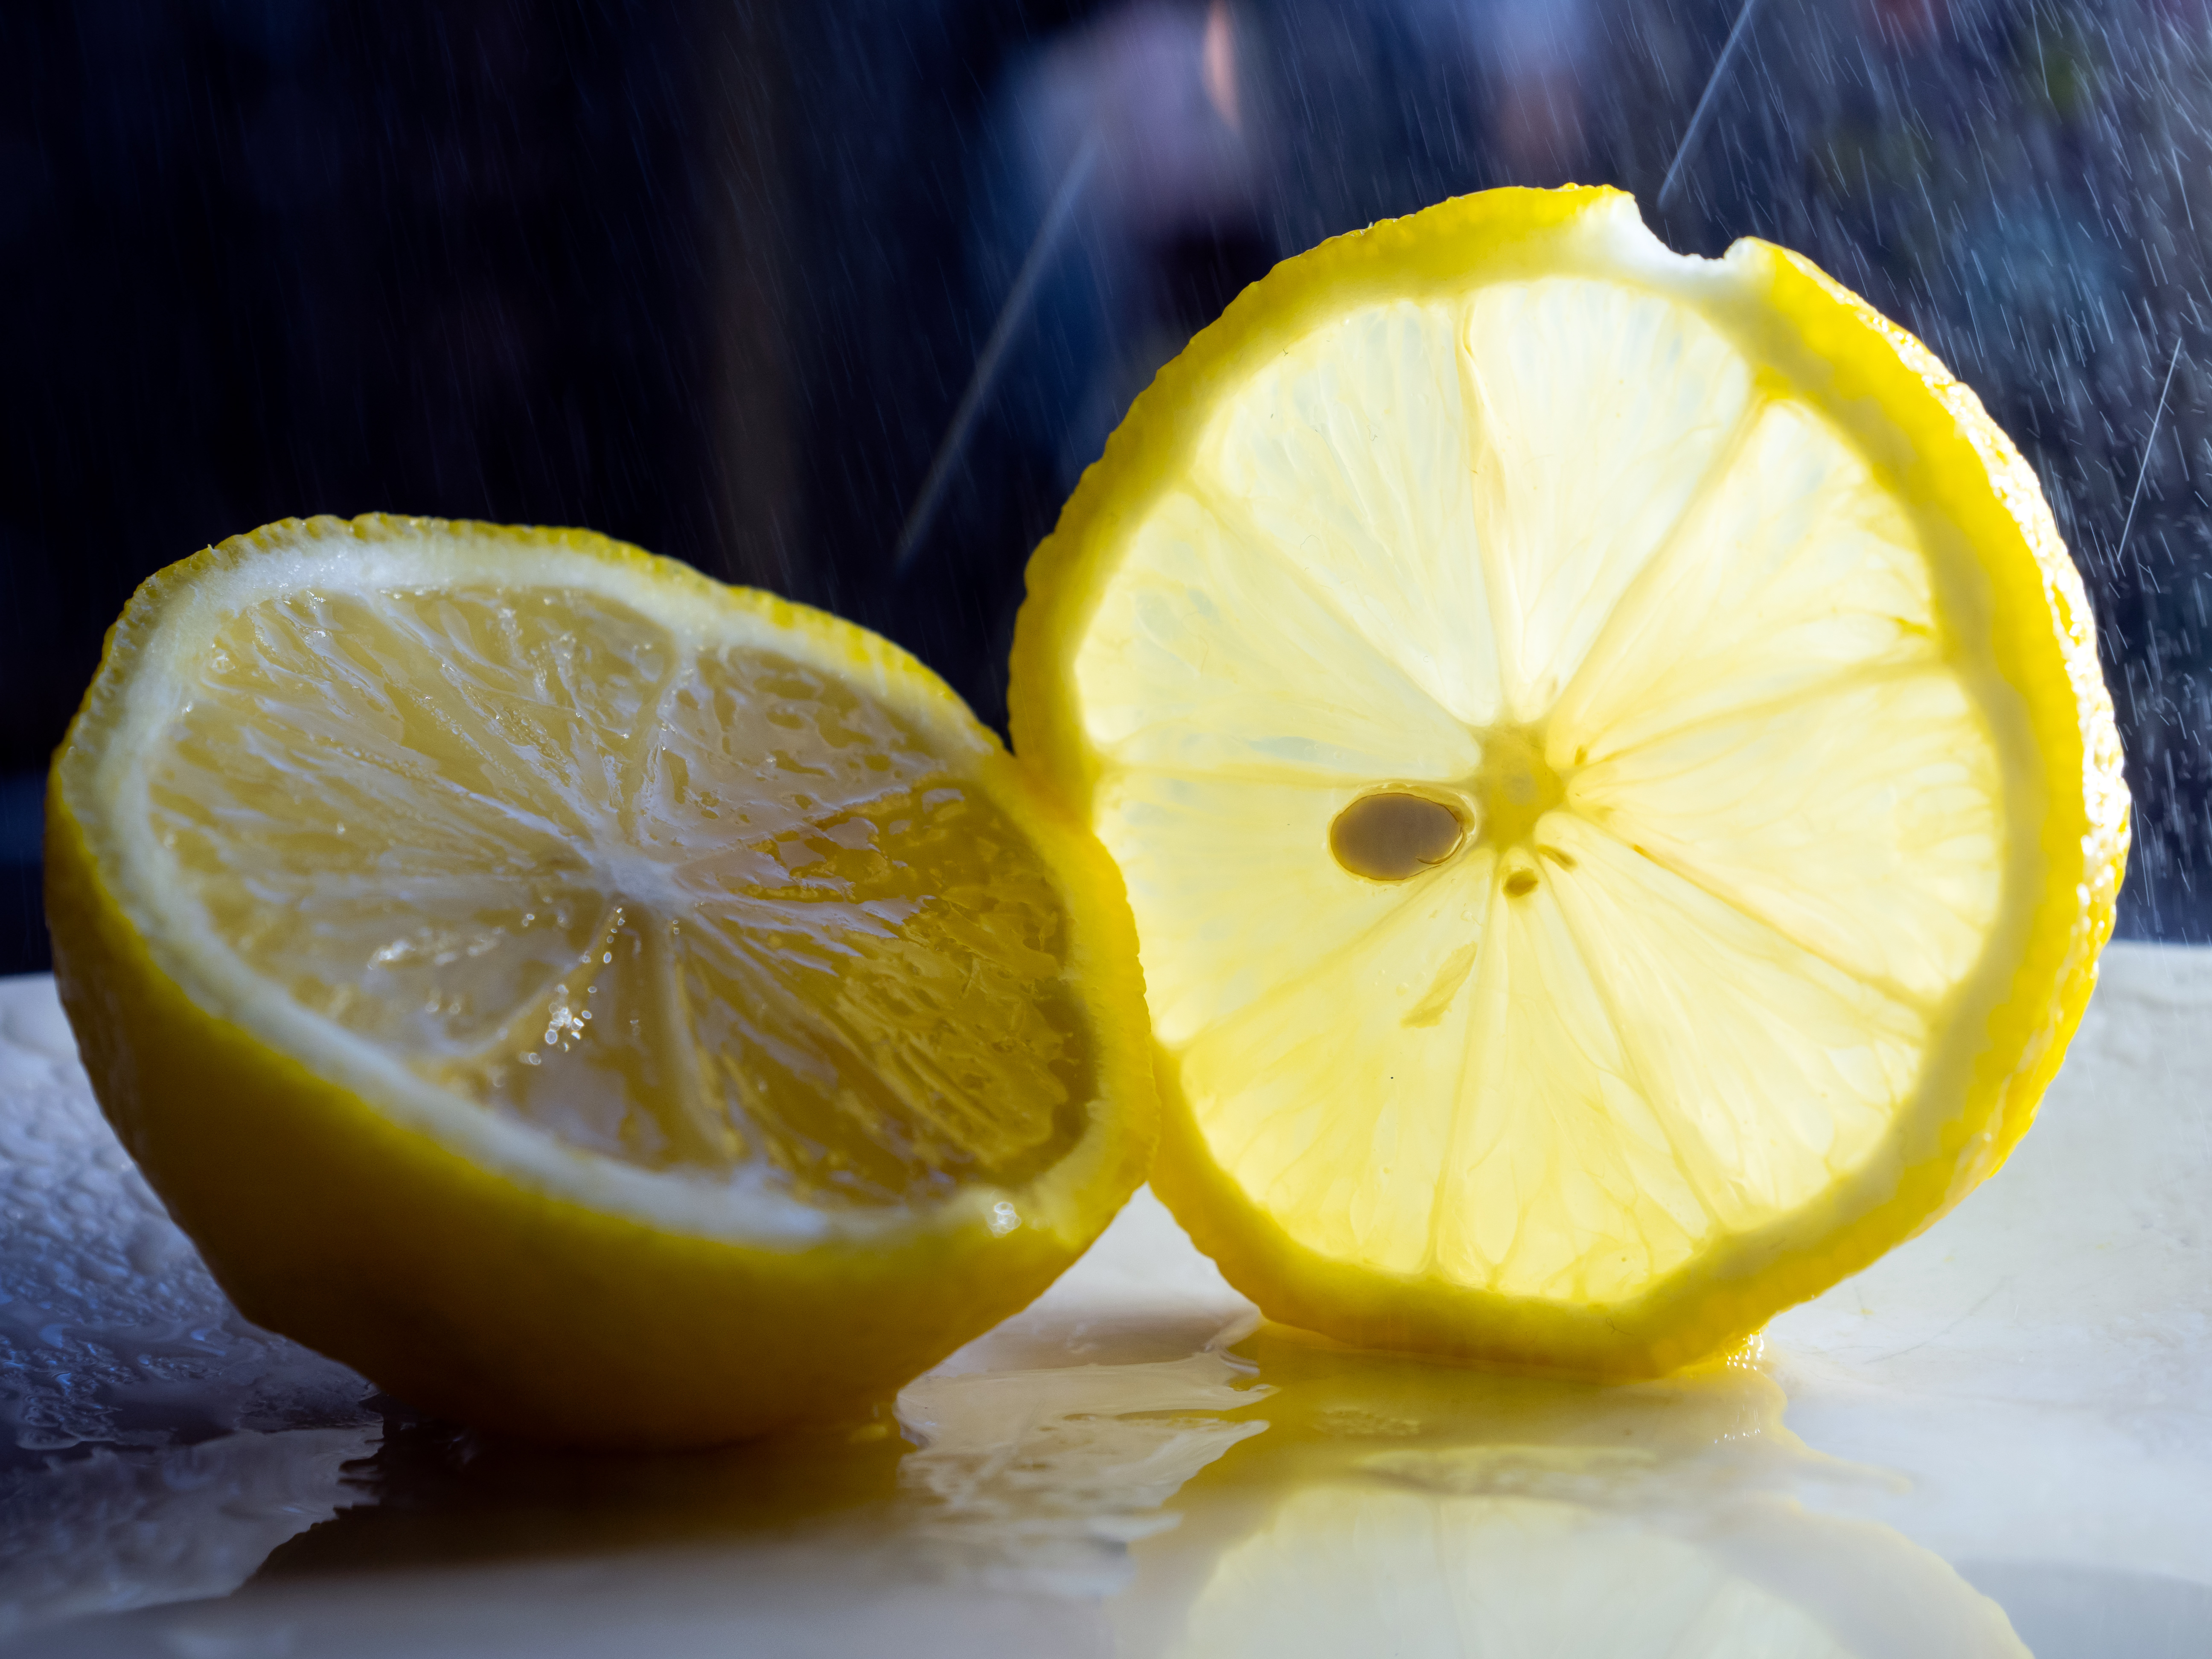 High-speed shooting a lemon with water spray, 1/160s, f/5, ISO400, 42mm, Photo: Joshua Waller